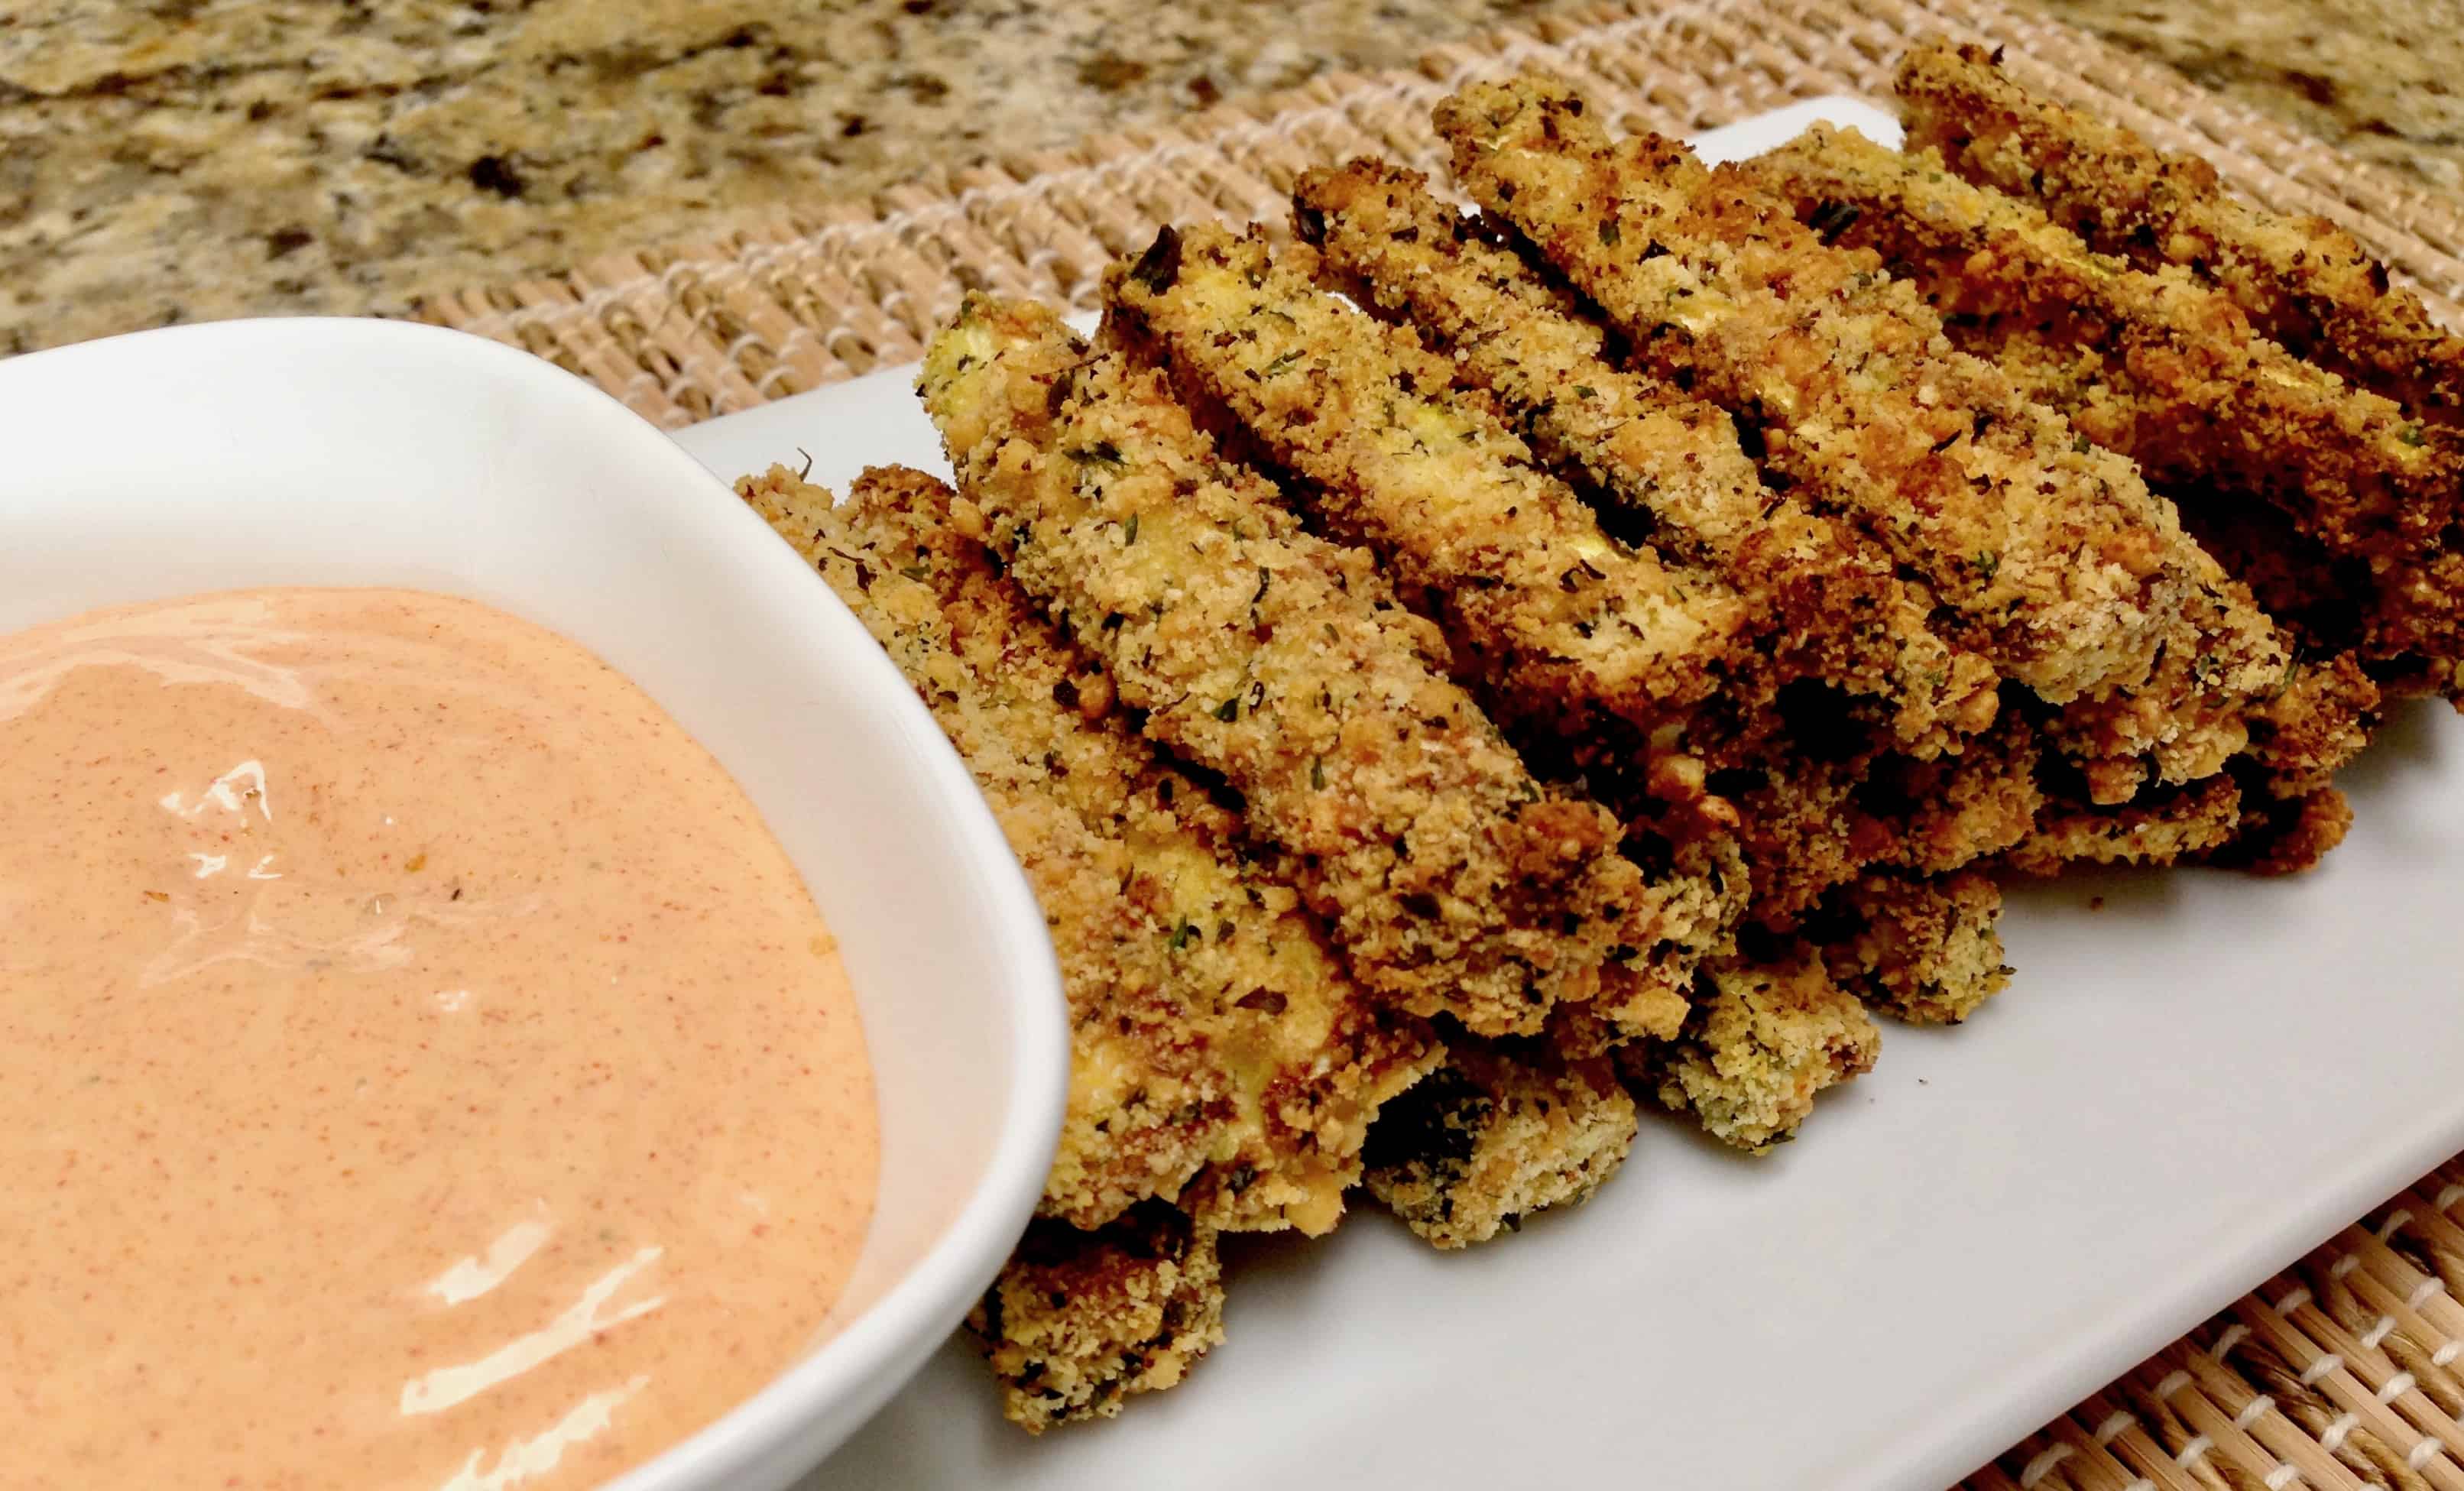 Baked Zucchini Fries with Dipping Sauce - Keto, Low Carb & Gluten Free